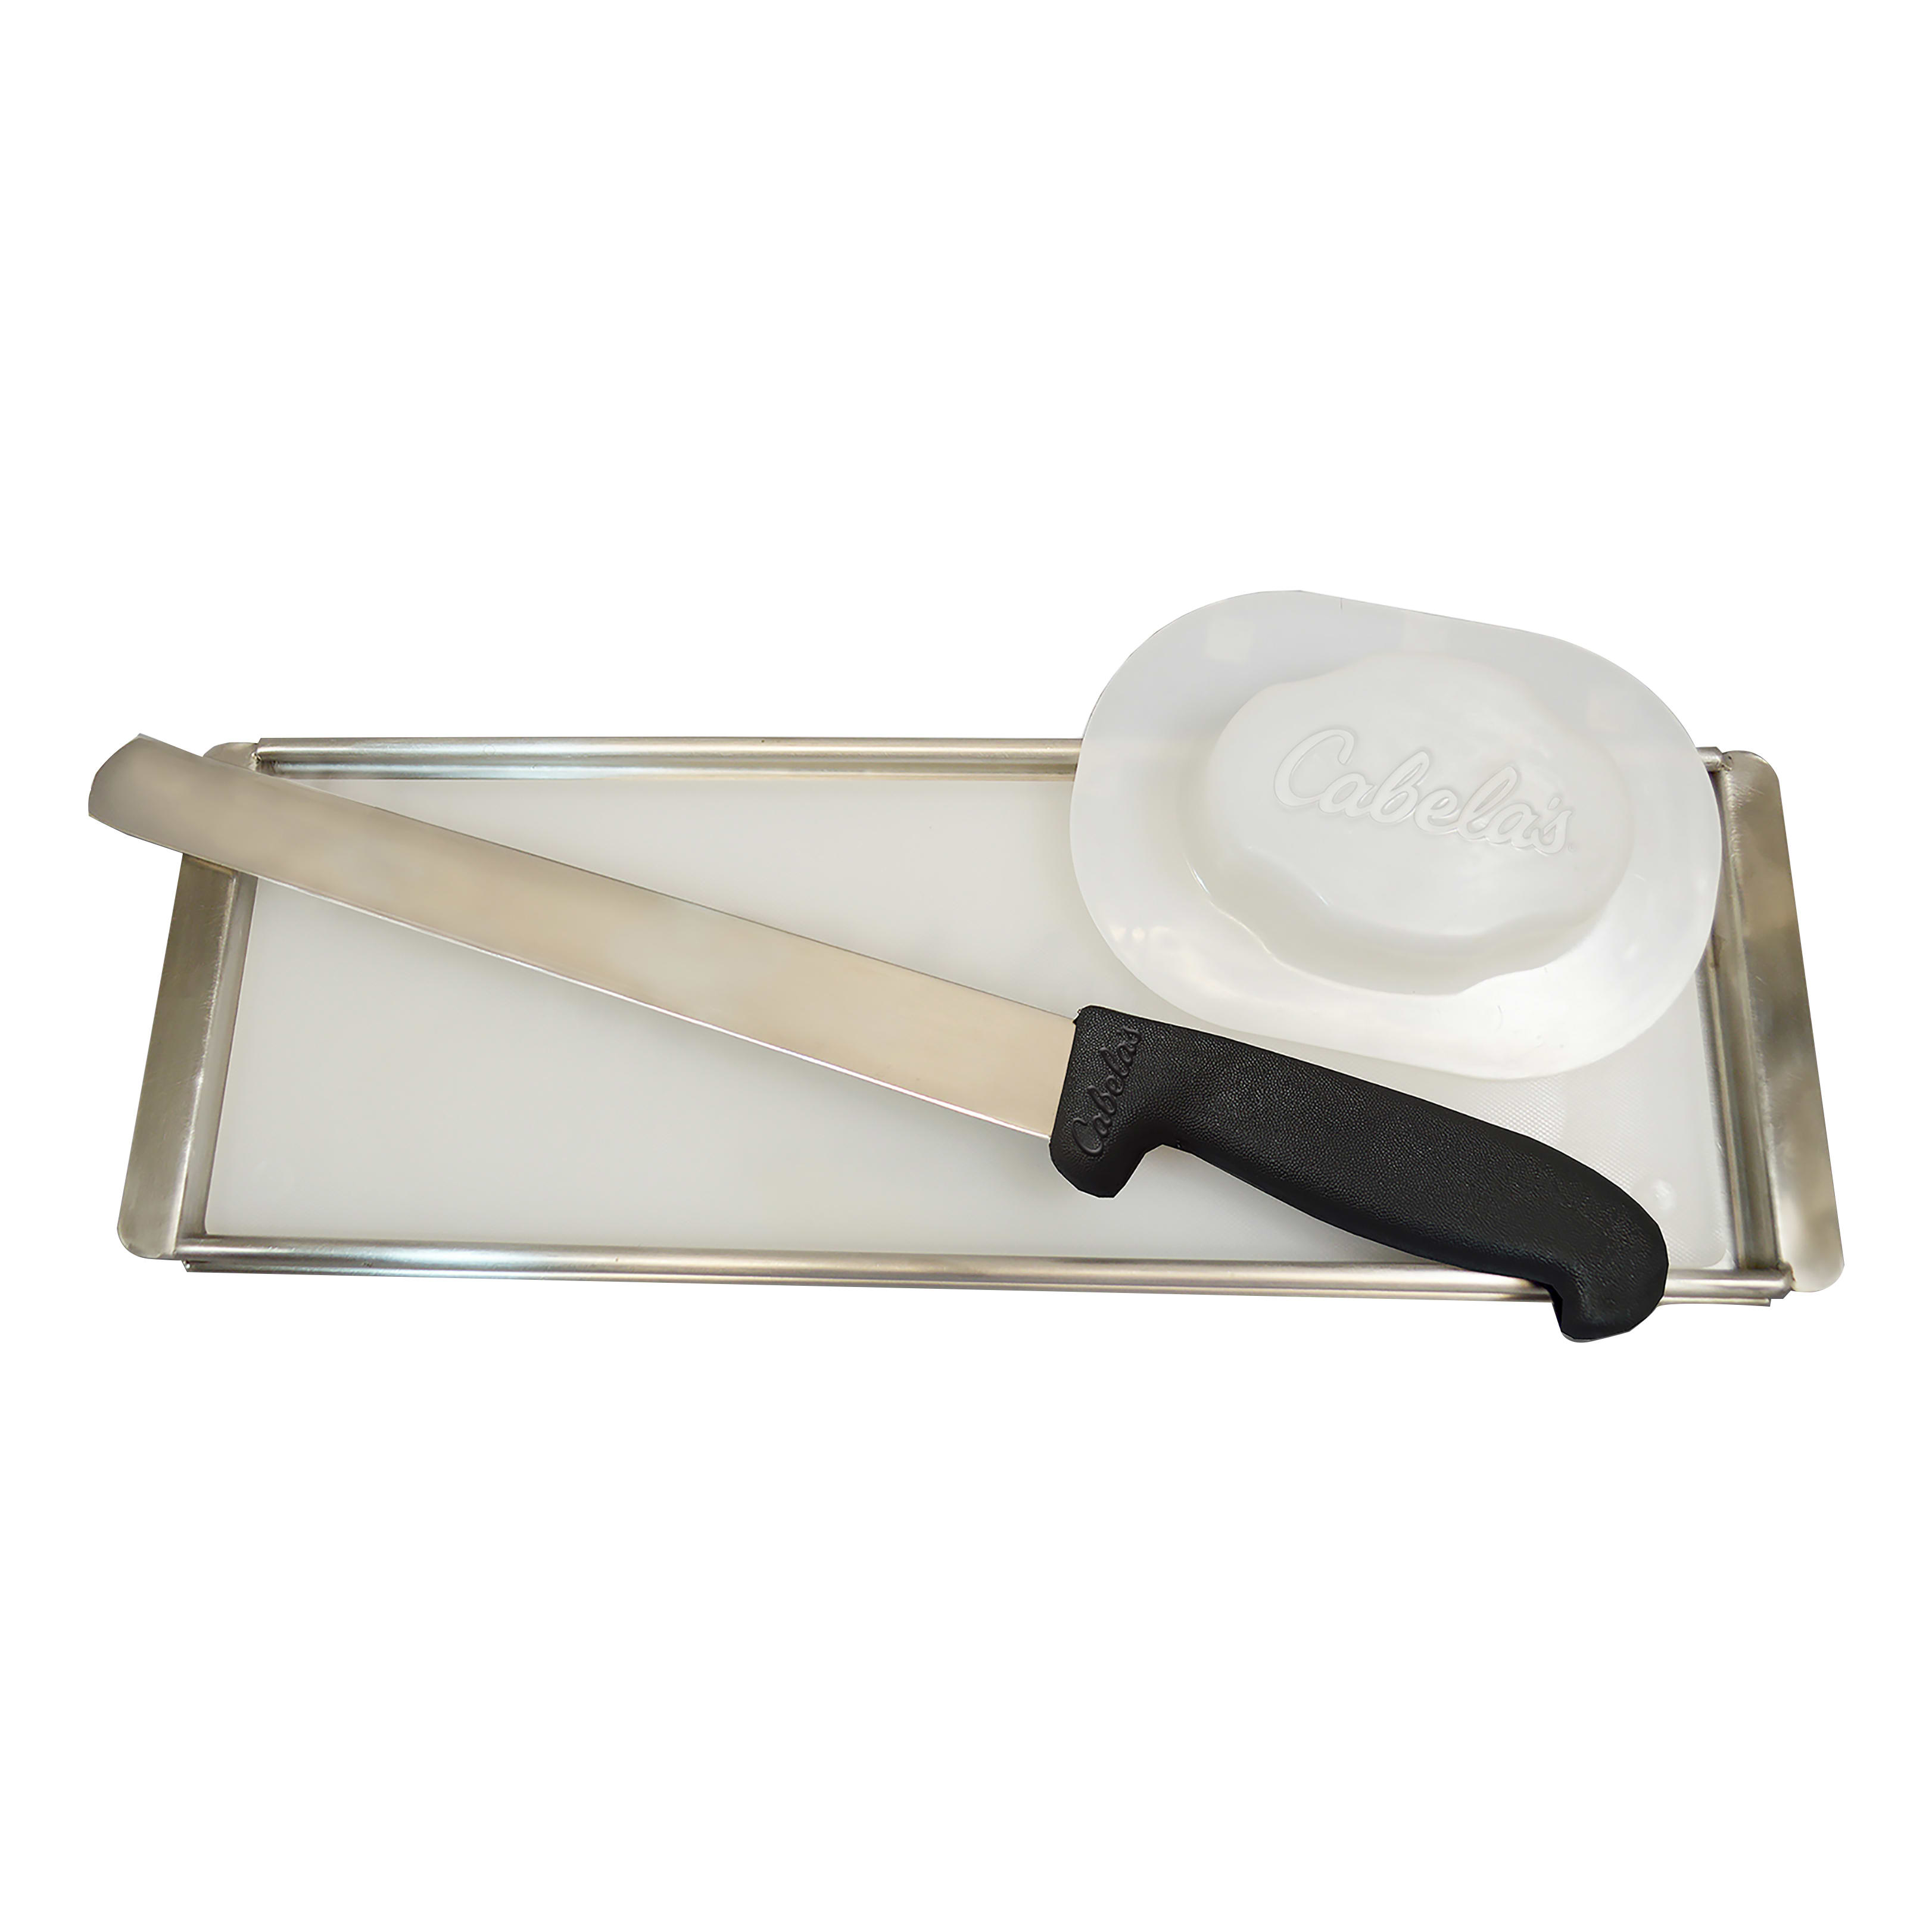 Jerky Cutting Board with Knife - The Sausage Maker